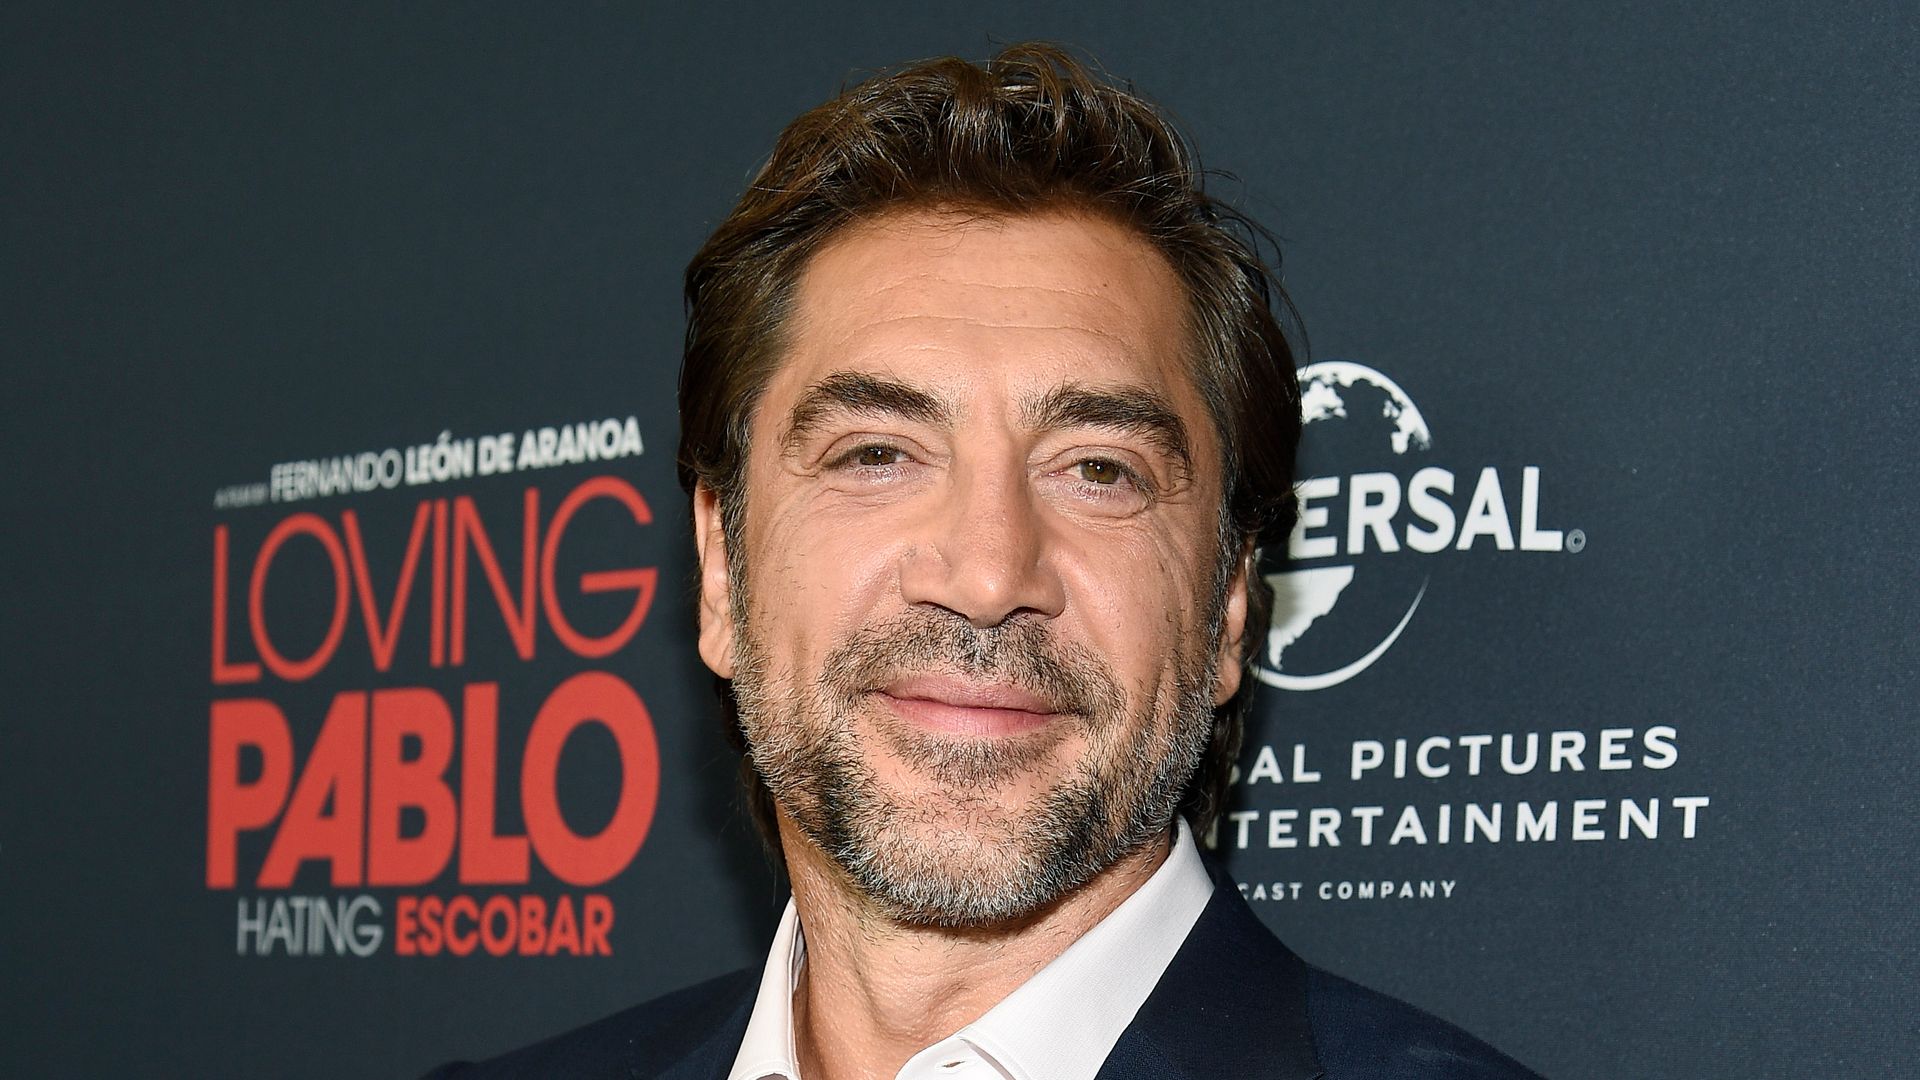 Javier Bardem poses during the Universal Pictures Home Entertainment Content Group's "Loving Pablo" special screening at The London West Hollywood on September 16, 2018 in West Hollywood, California